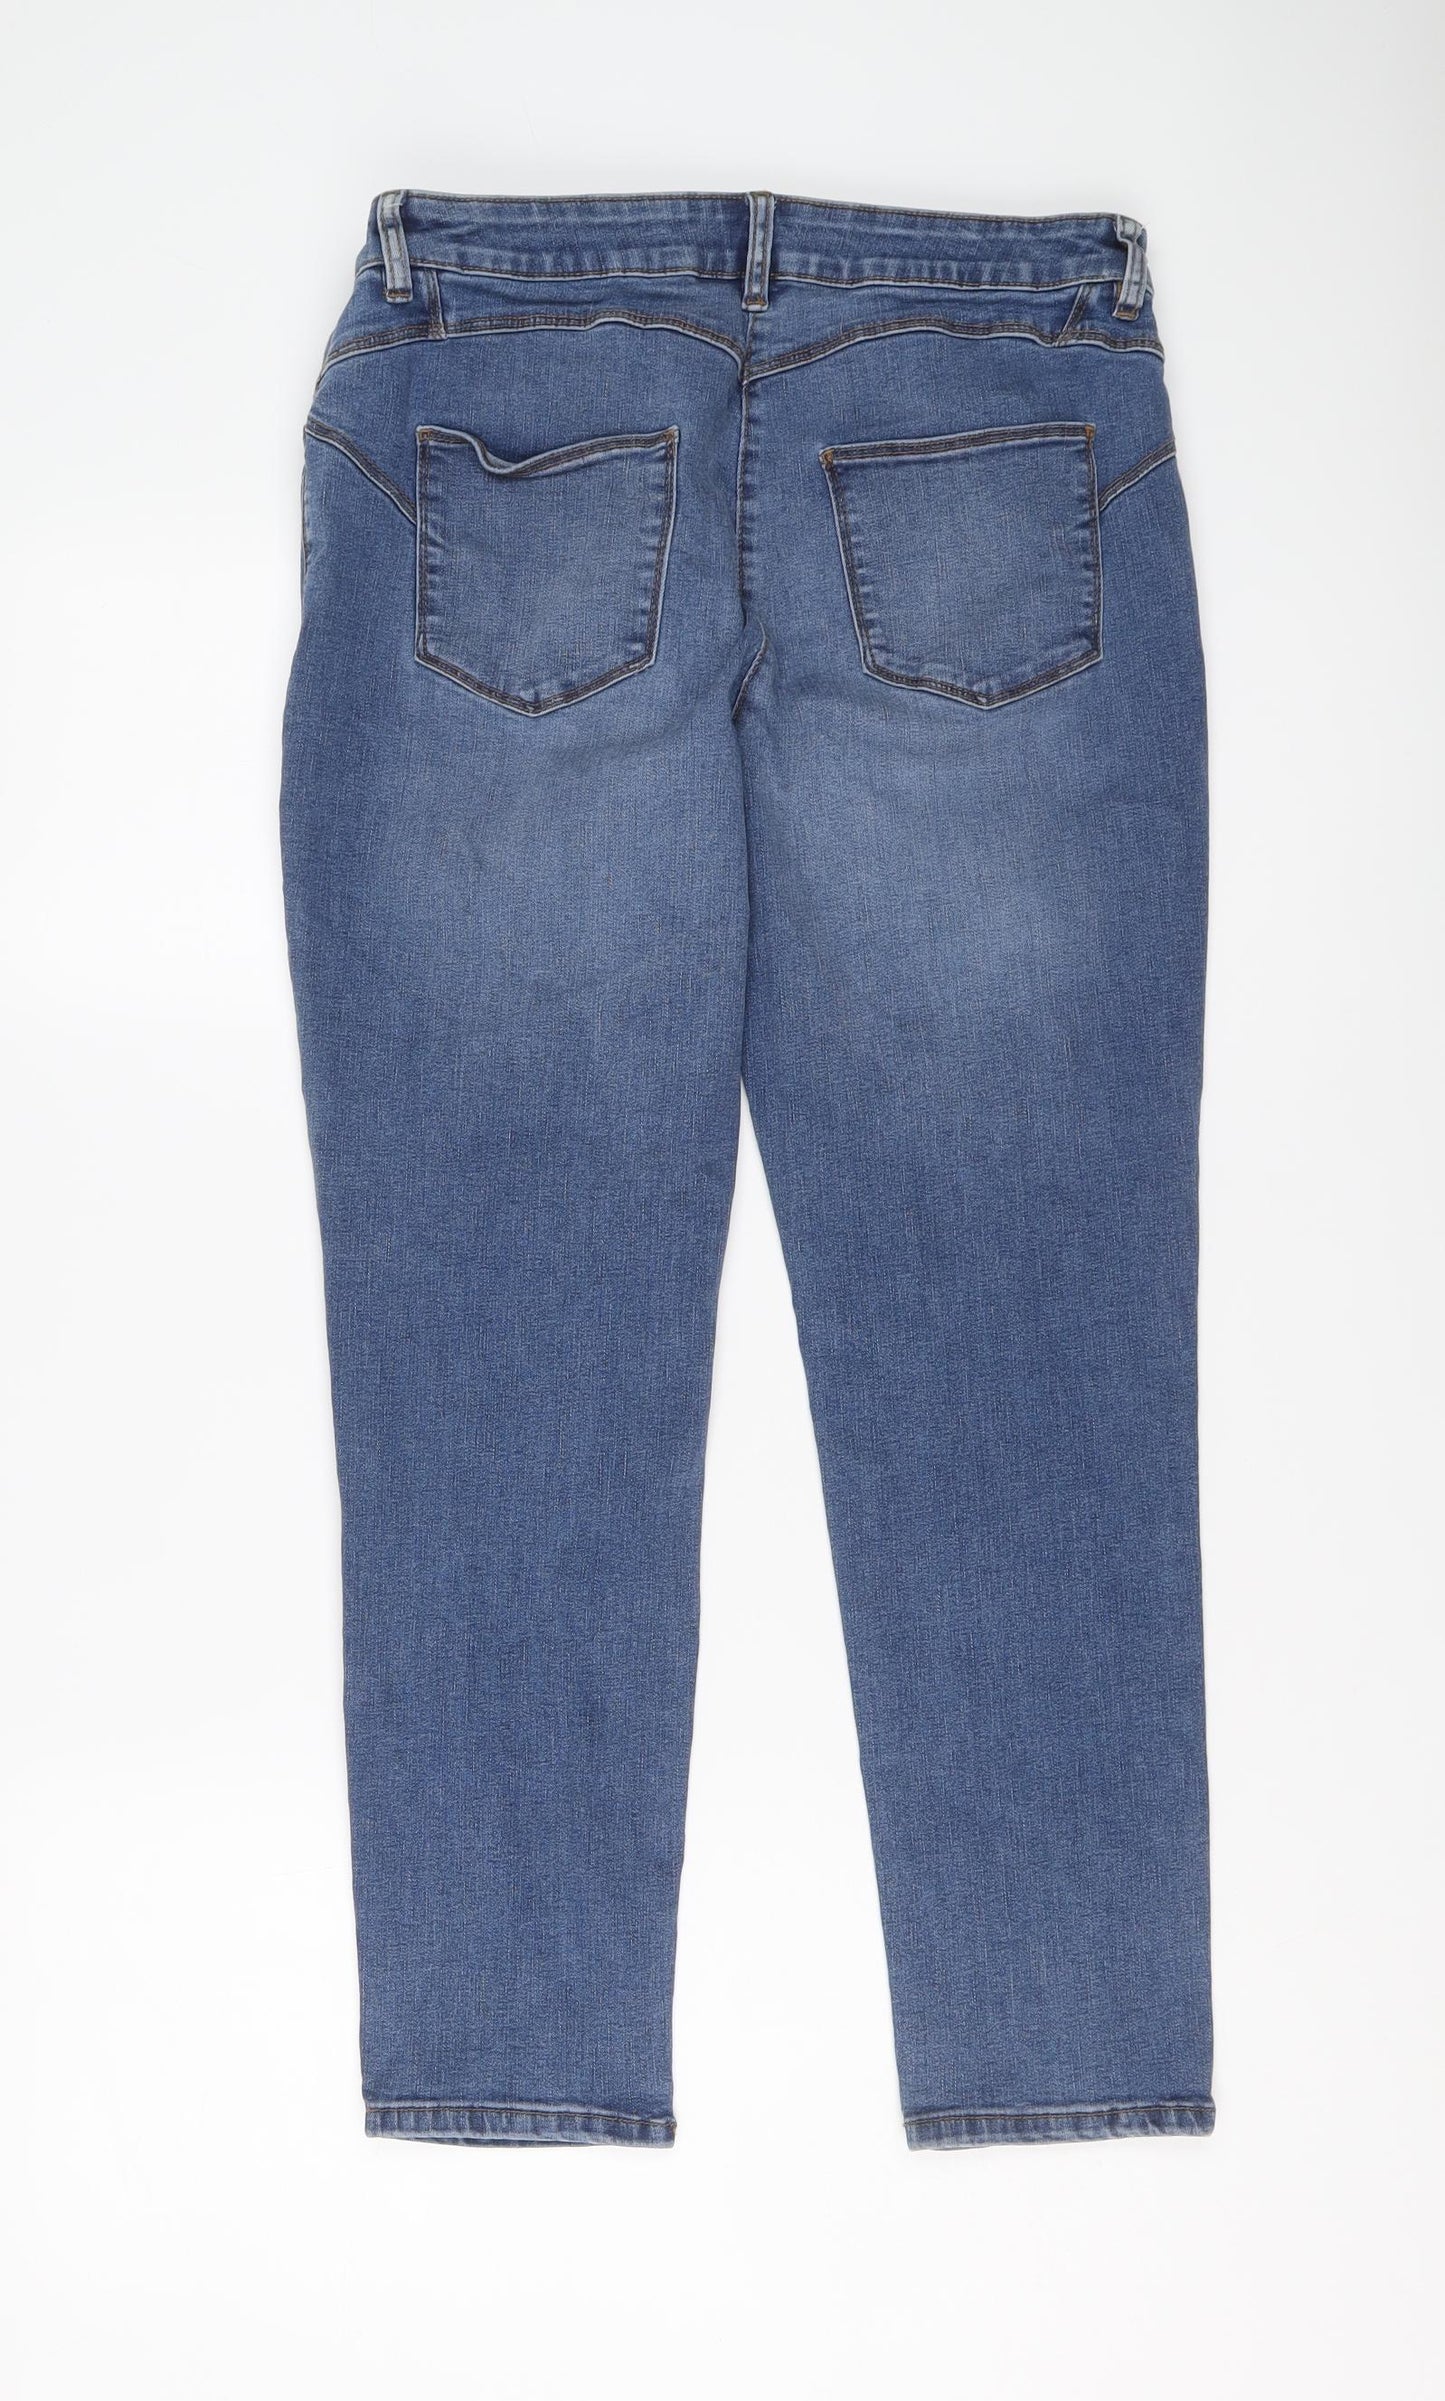 Marks and Spencer Womens Blue Cotton Skinny Jeans Size 14 L26 in Regular Button